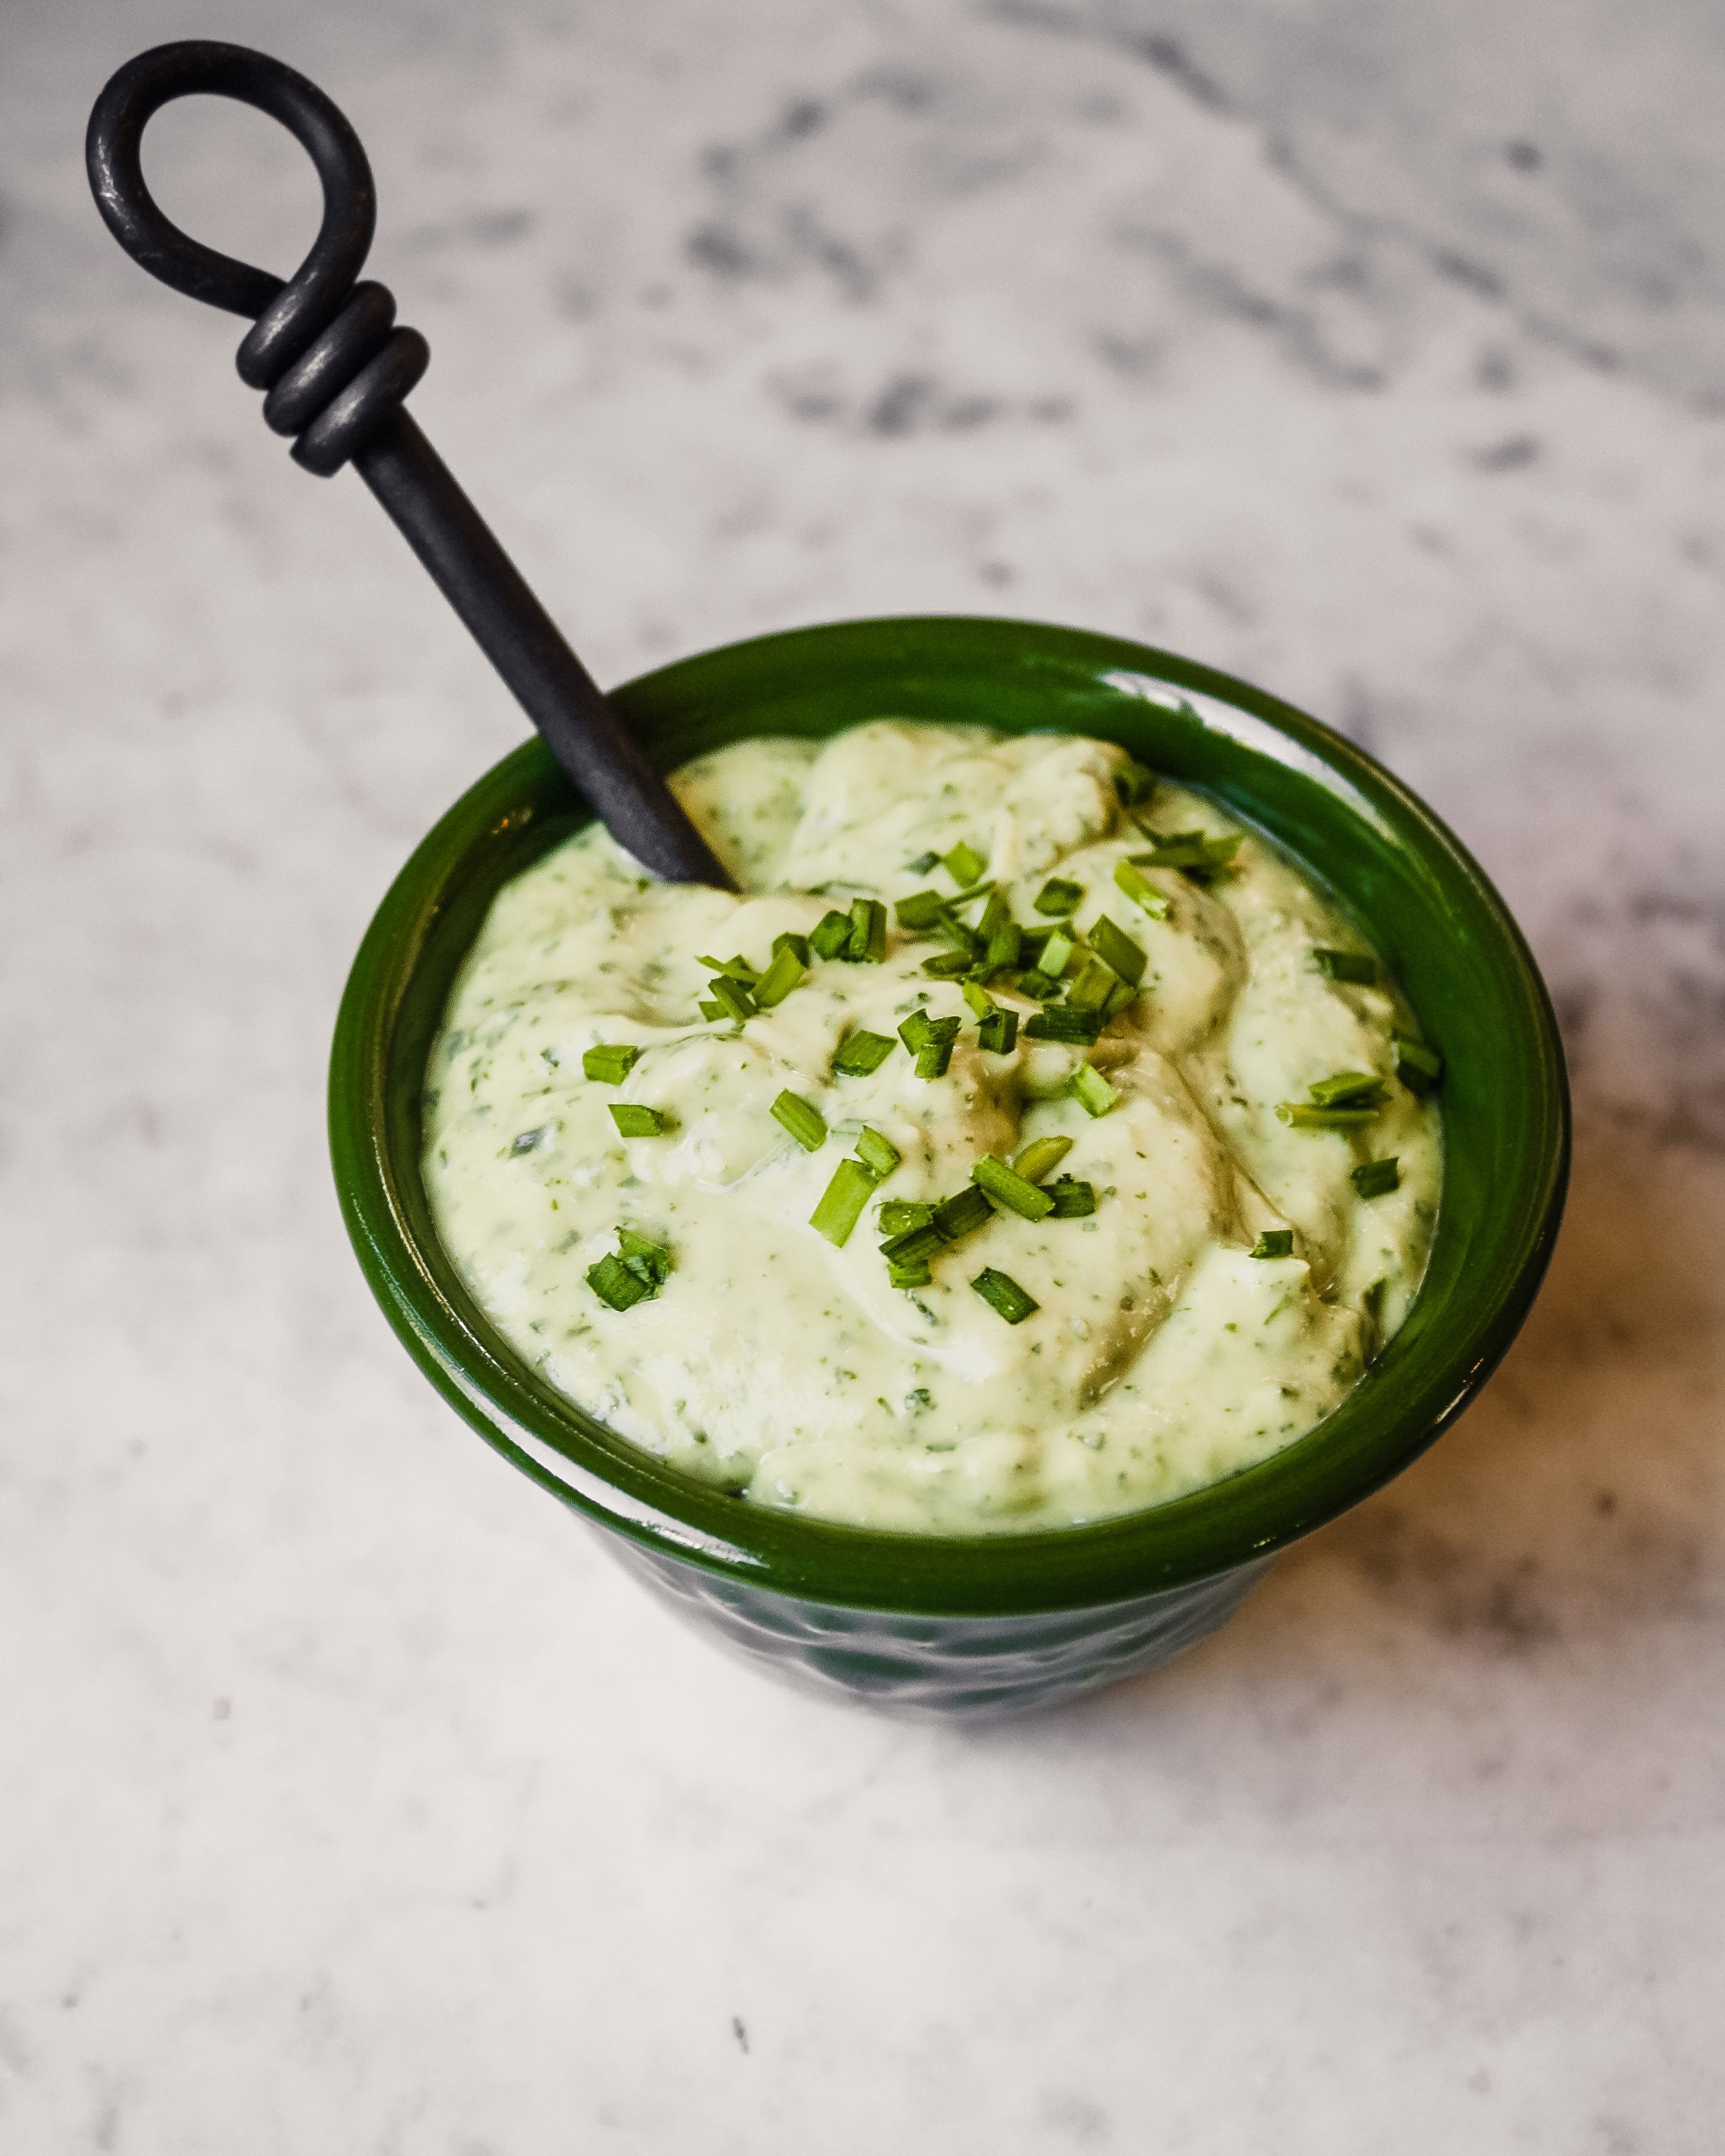 Photograph of a green bowl filled with green goddess dressing set on a marble table.